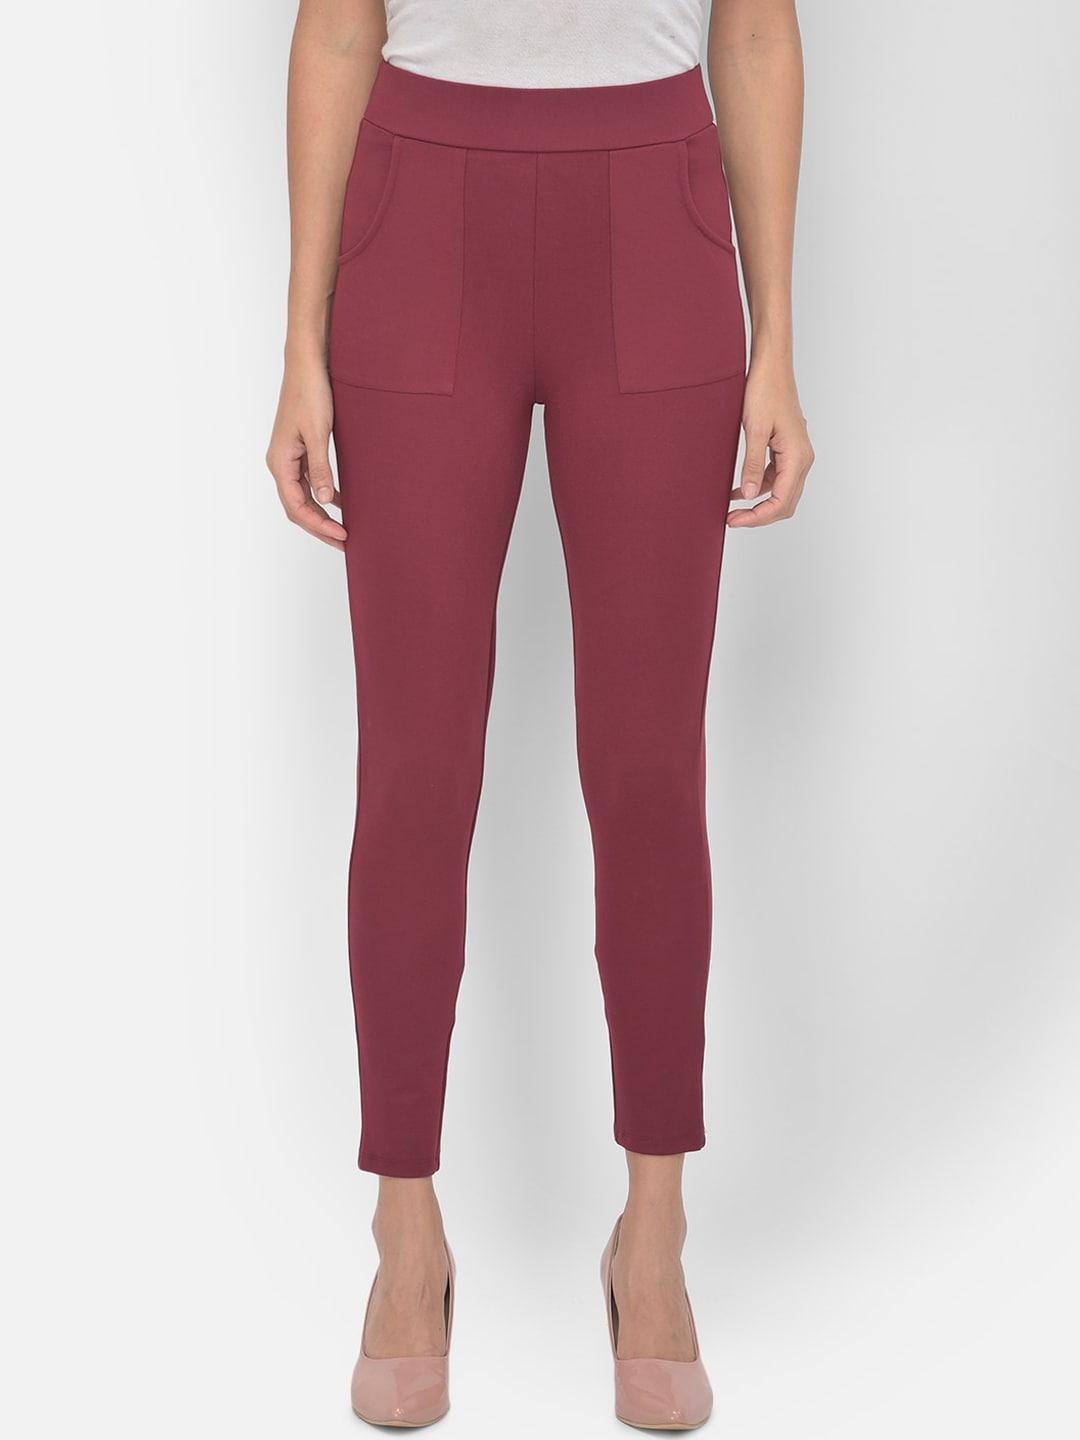 latin-quarters-women-maroon-solid-jeggings-with-pockets